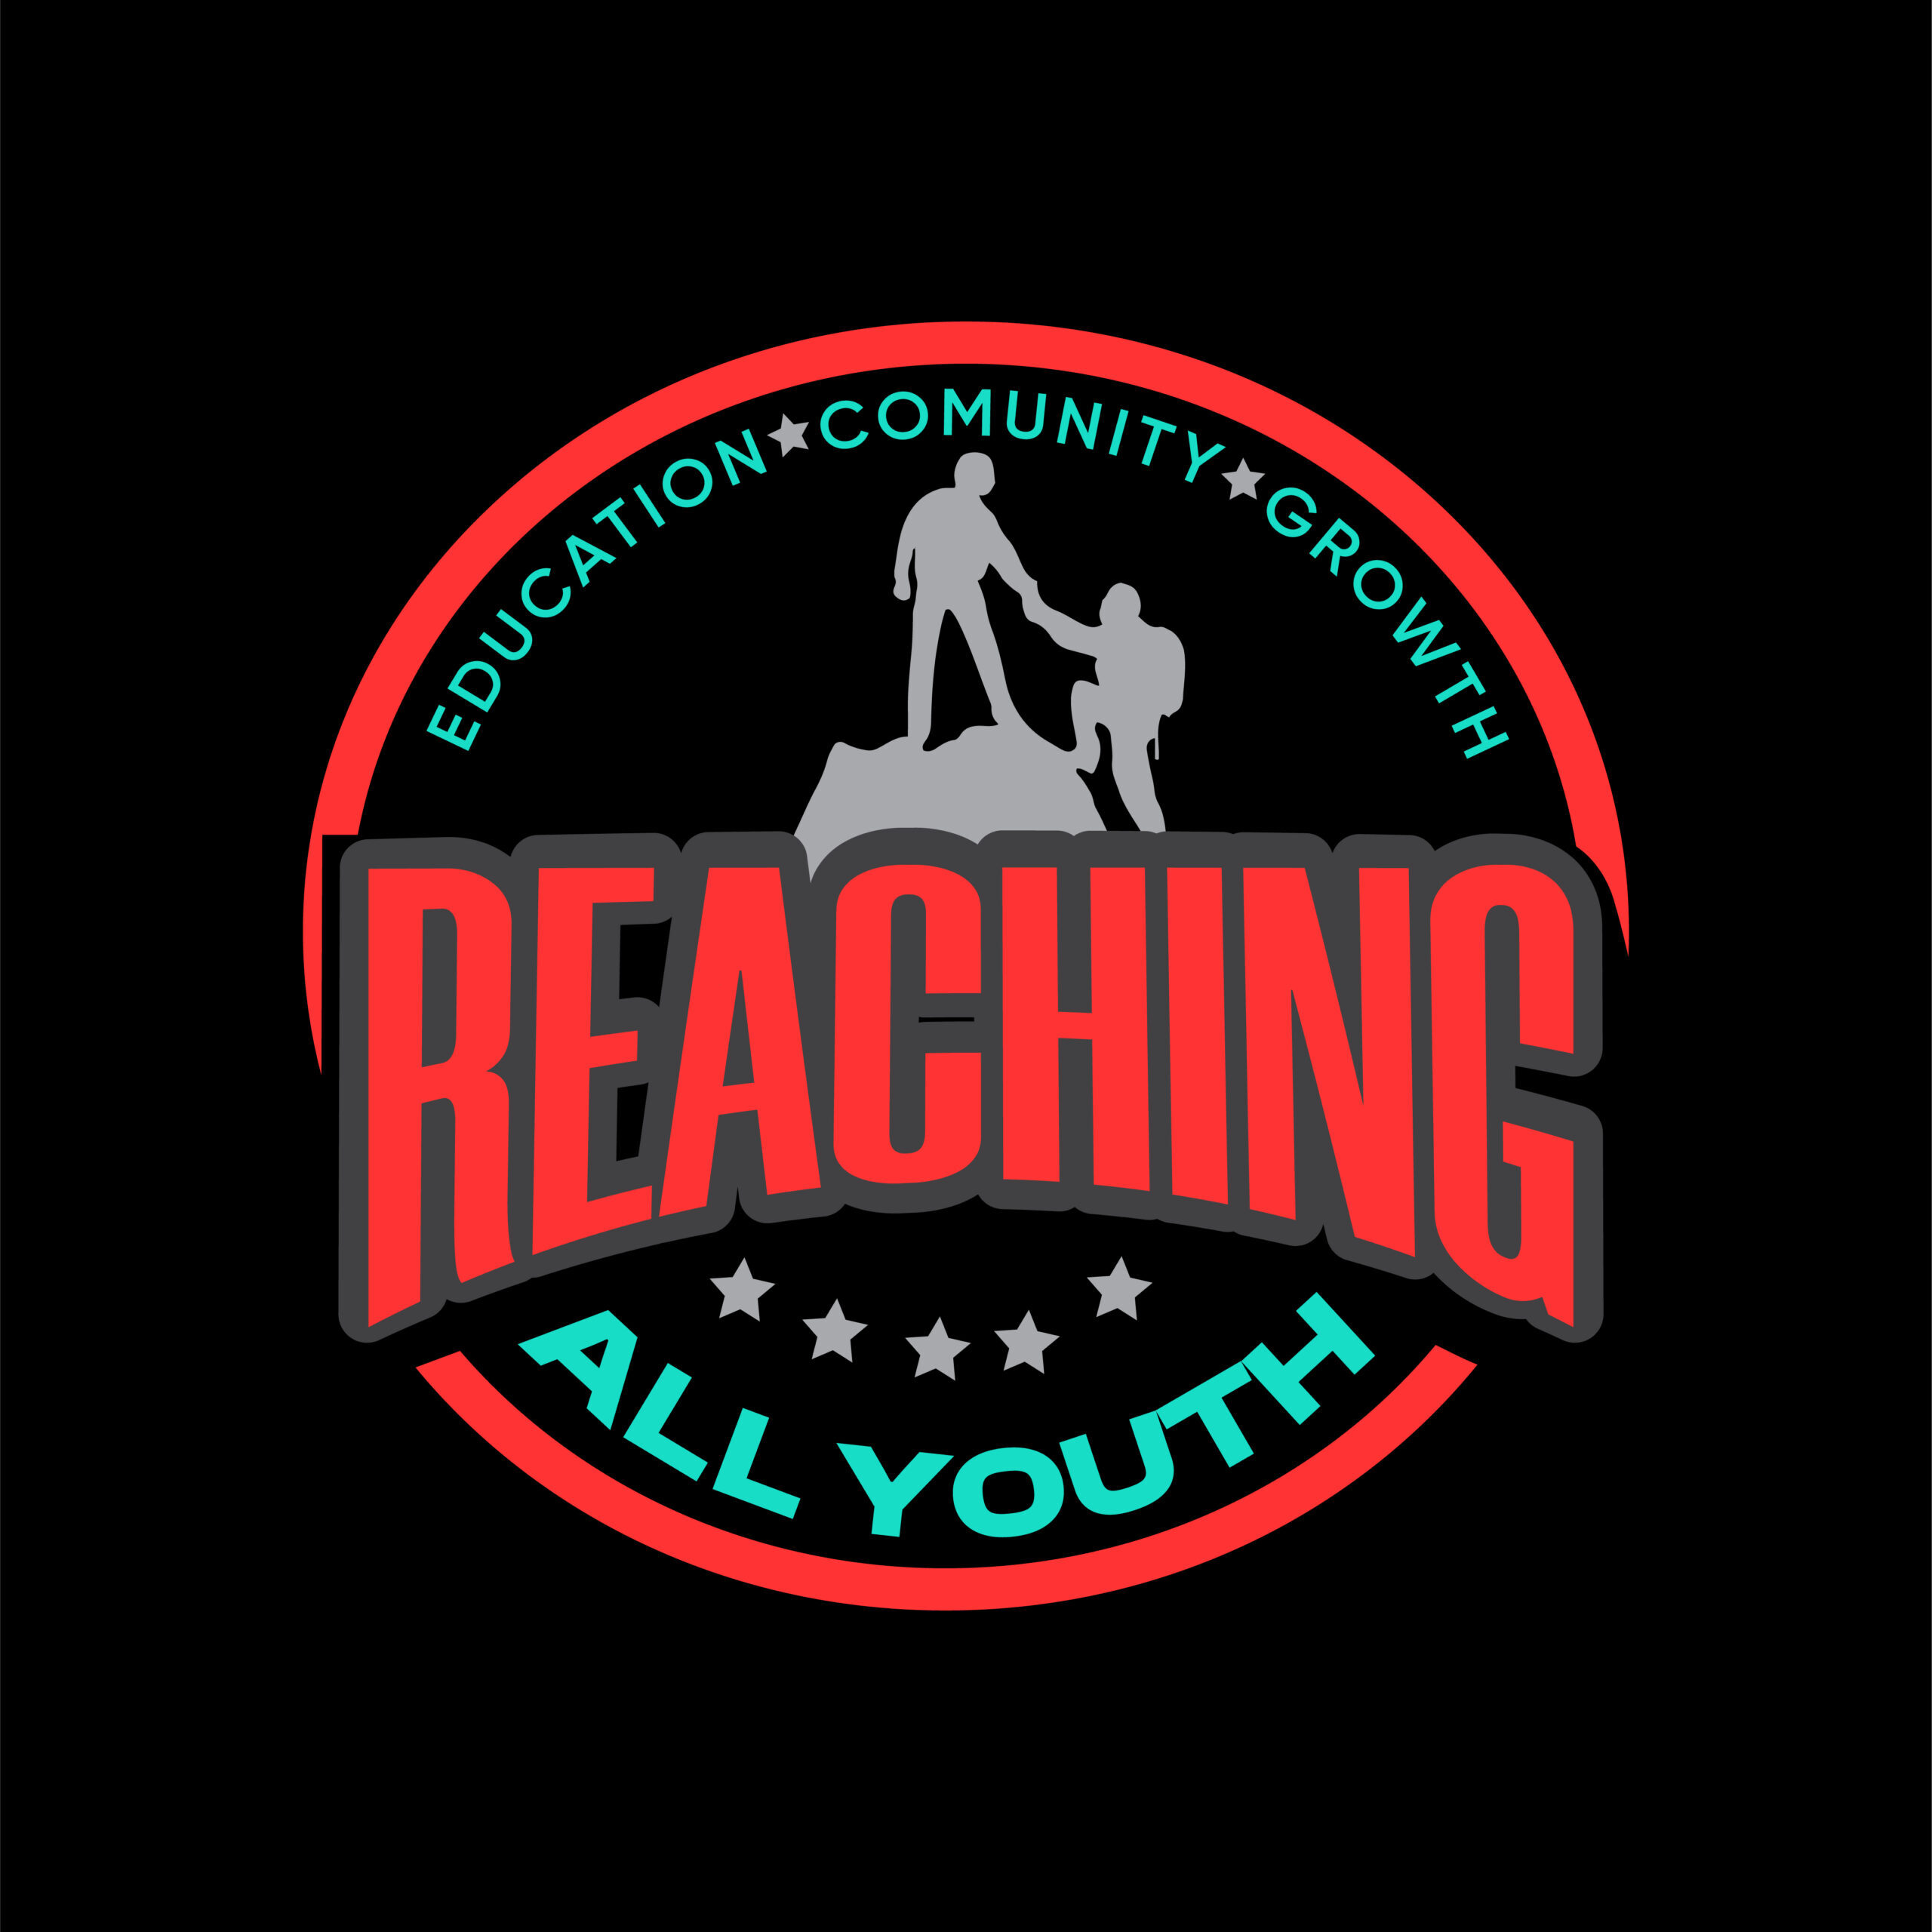 Reaching All Youth